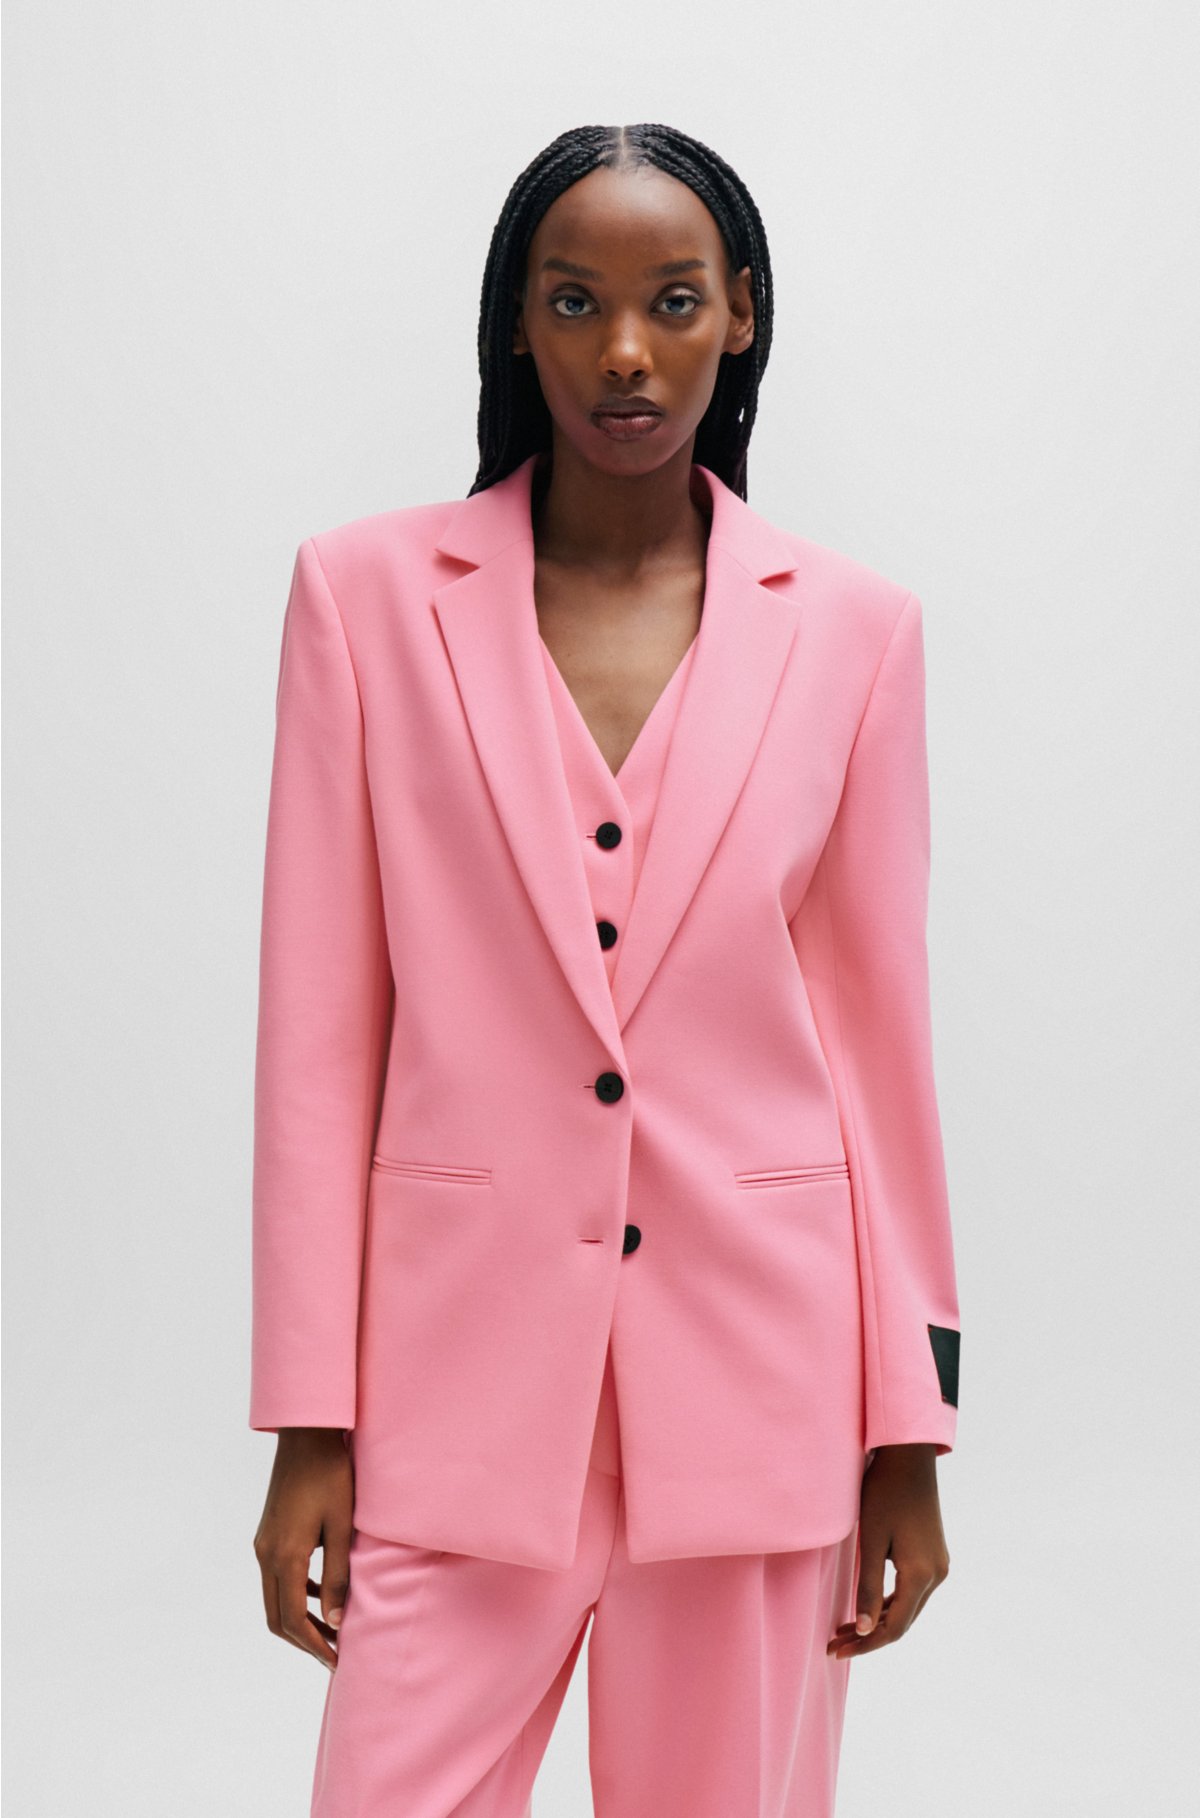 Regular-fit jacket in stretch fabric, light pink